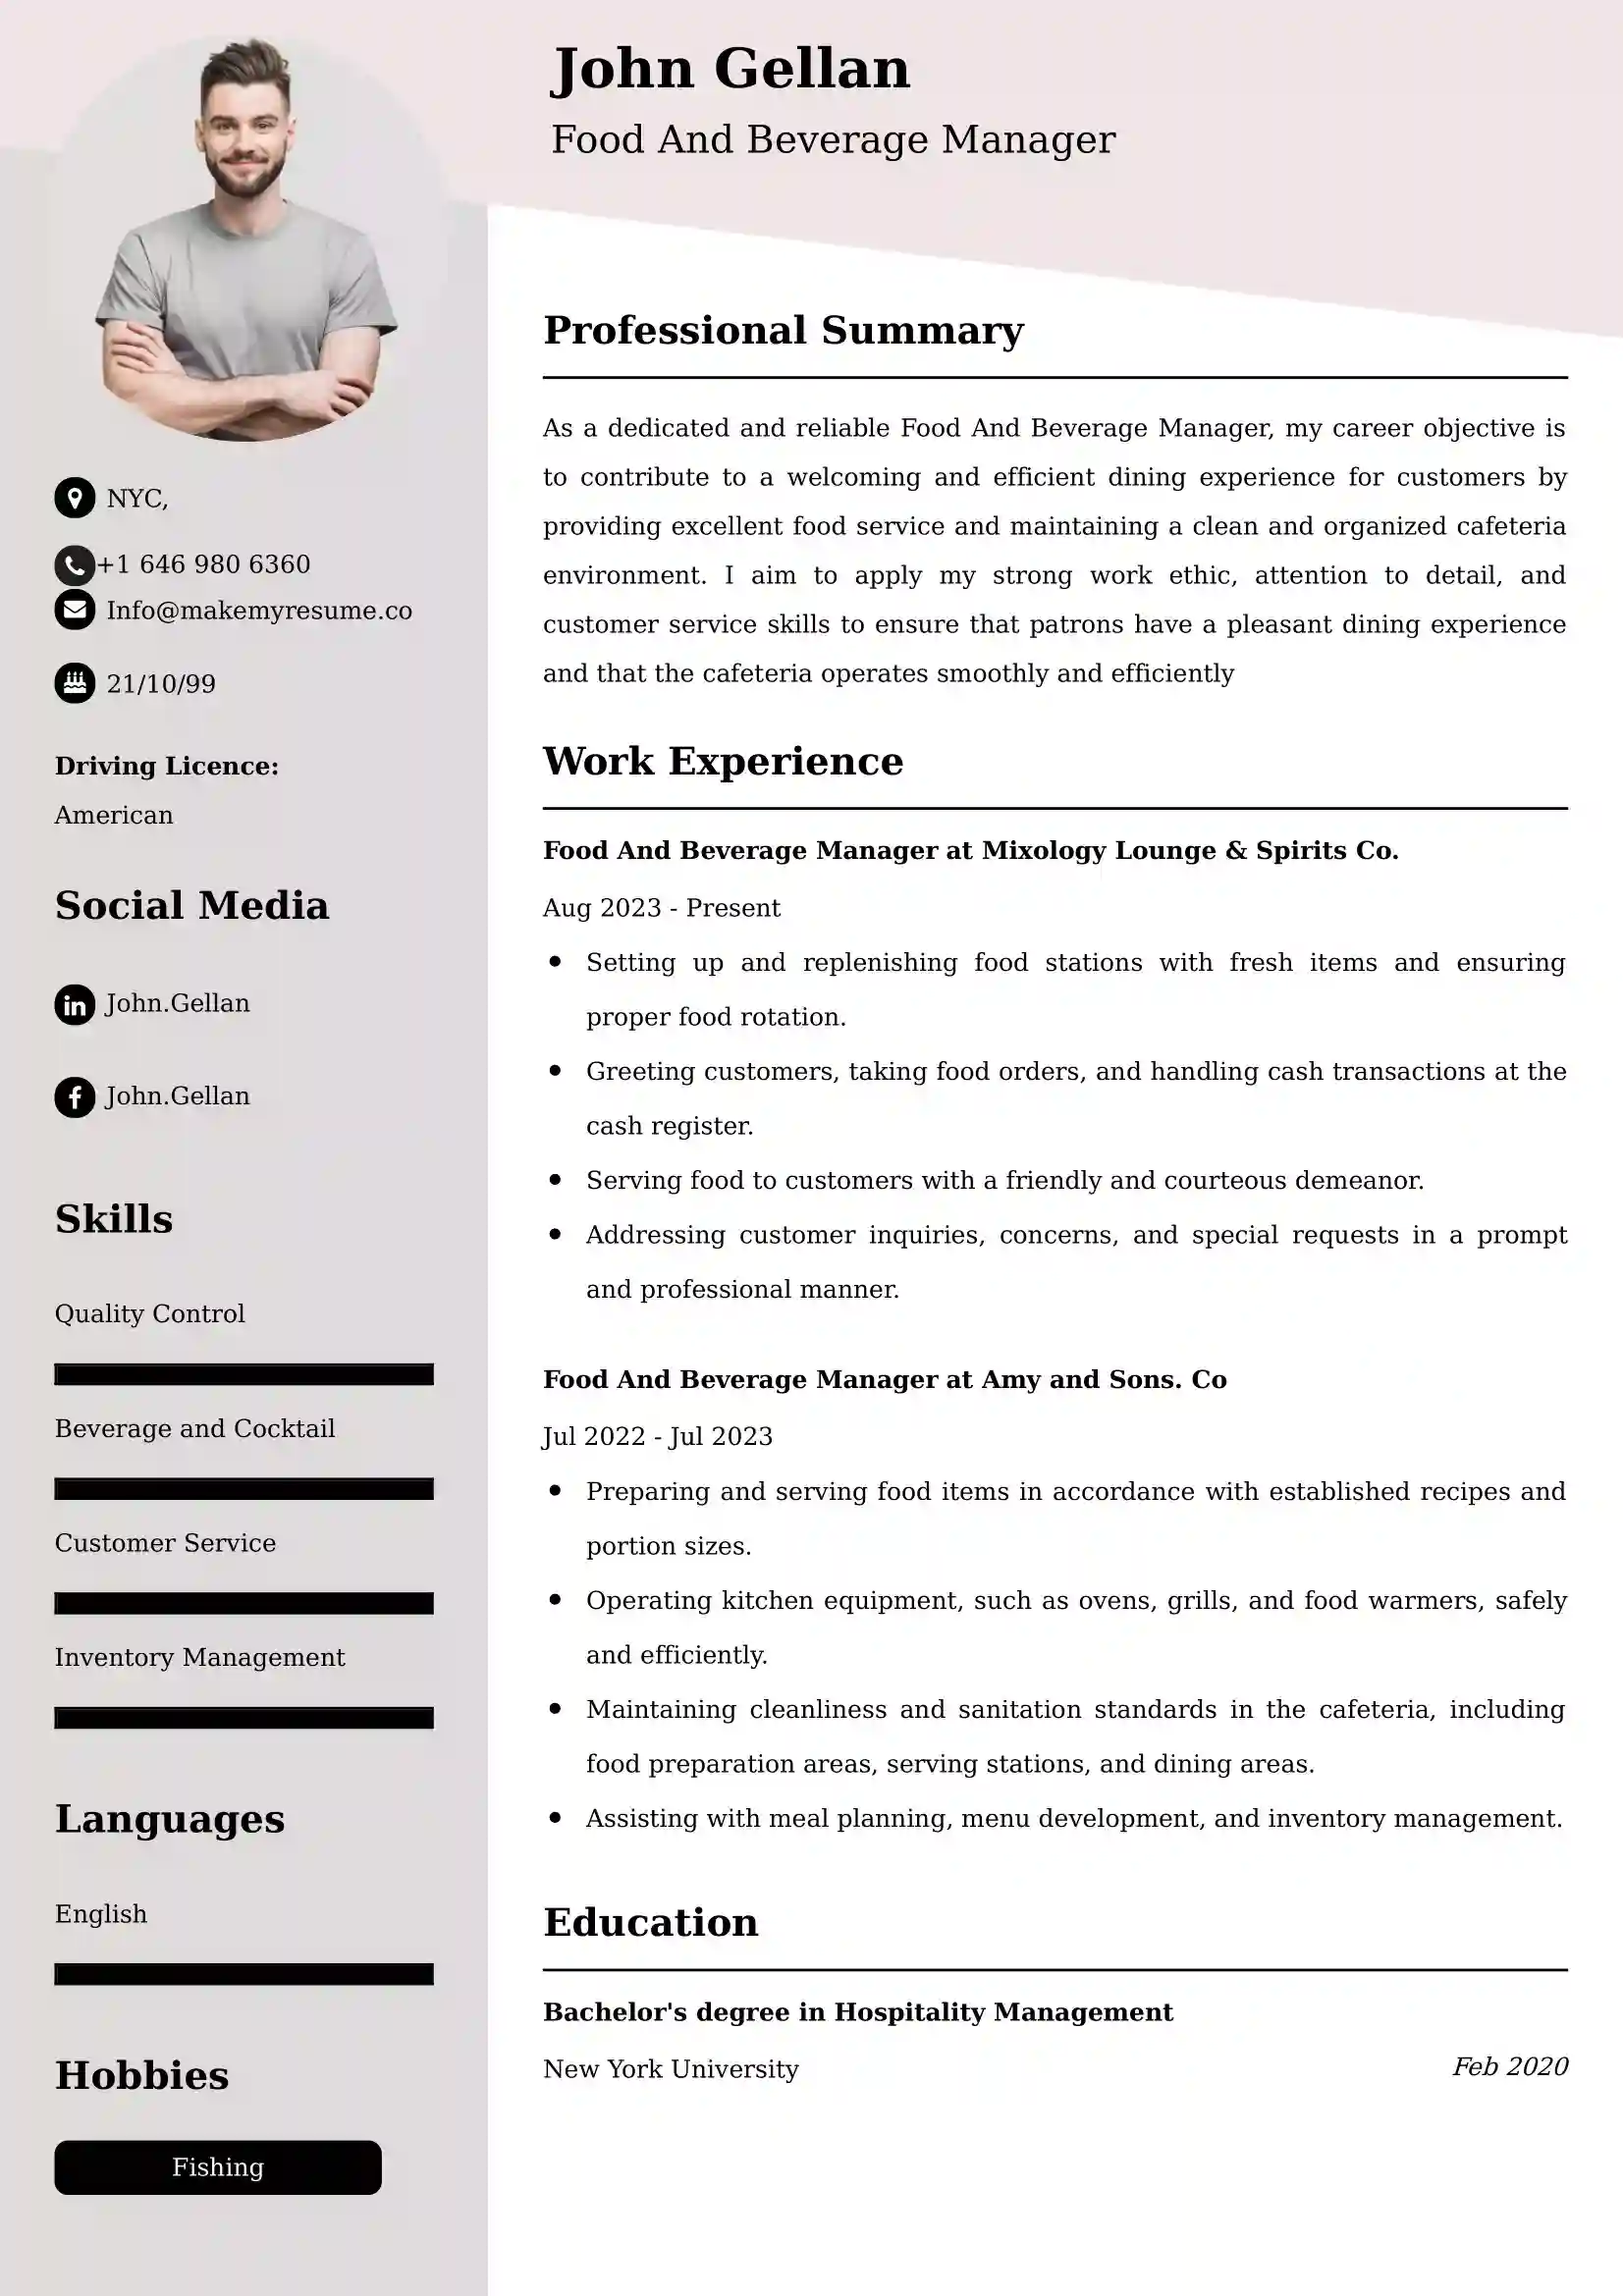 Food And Beverage Manager Resume Examples - Brazilian Format, Latest Template